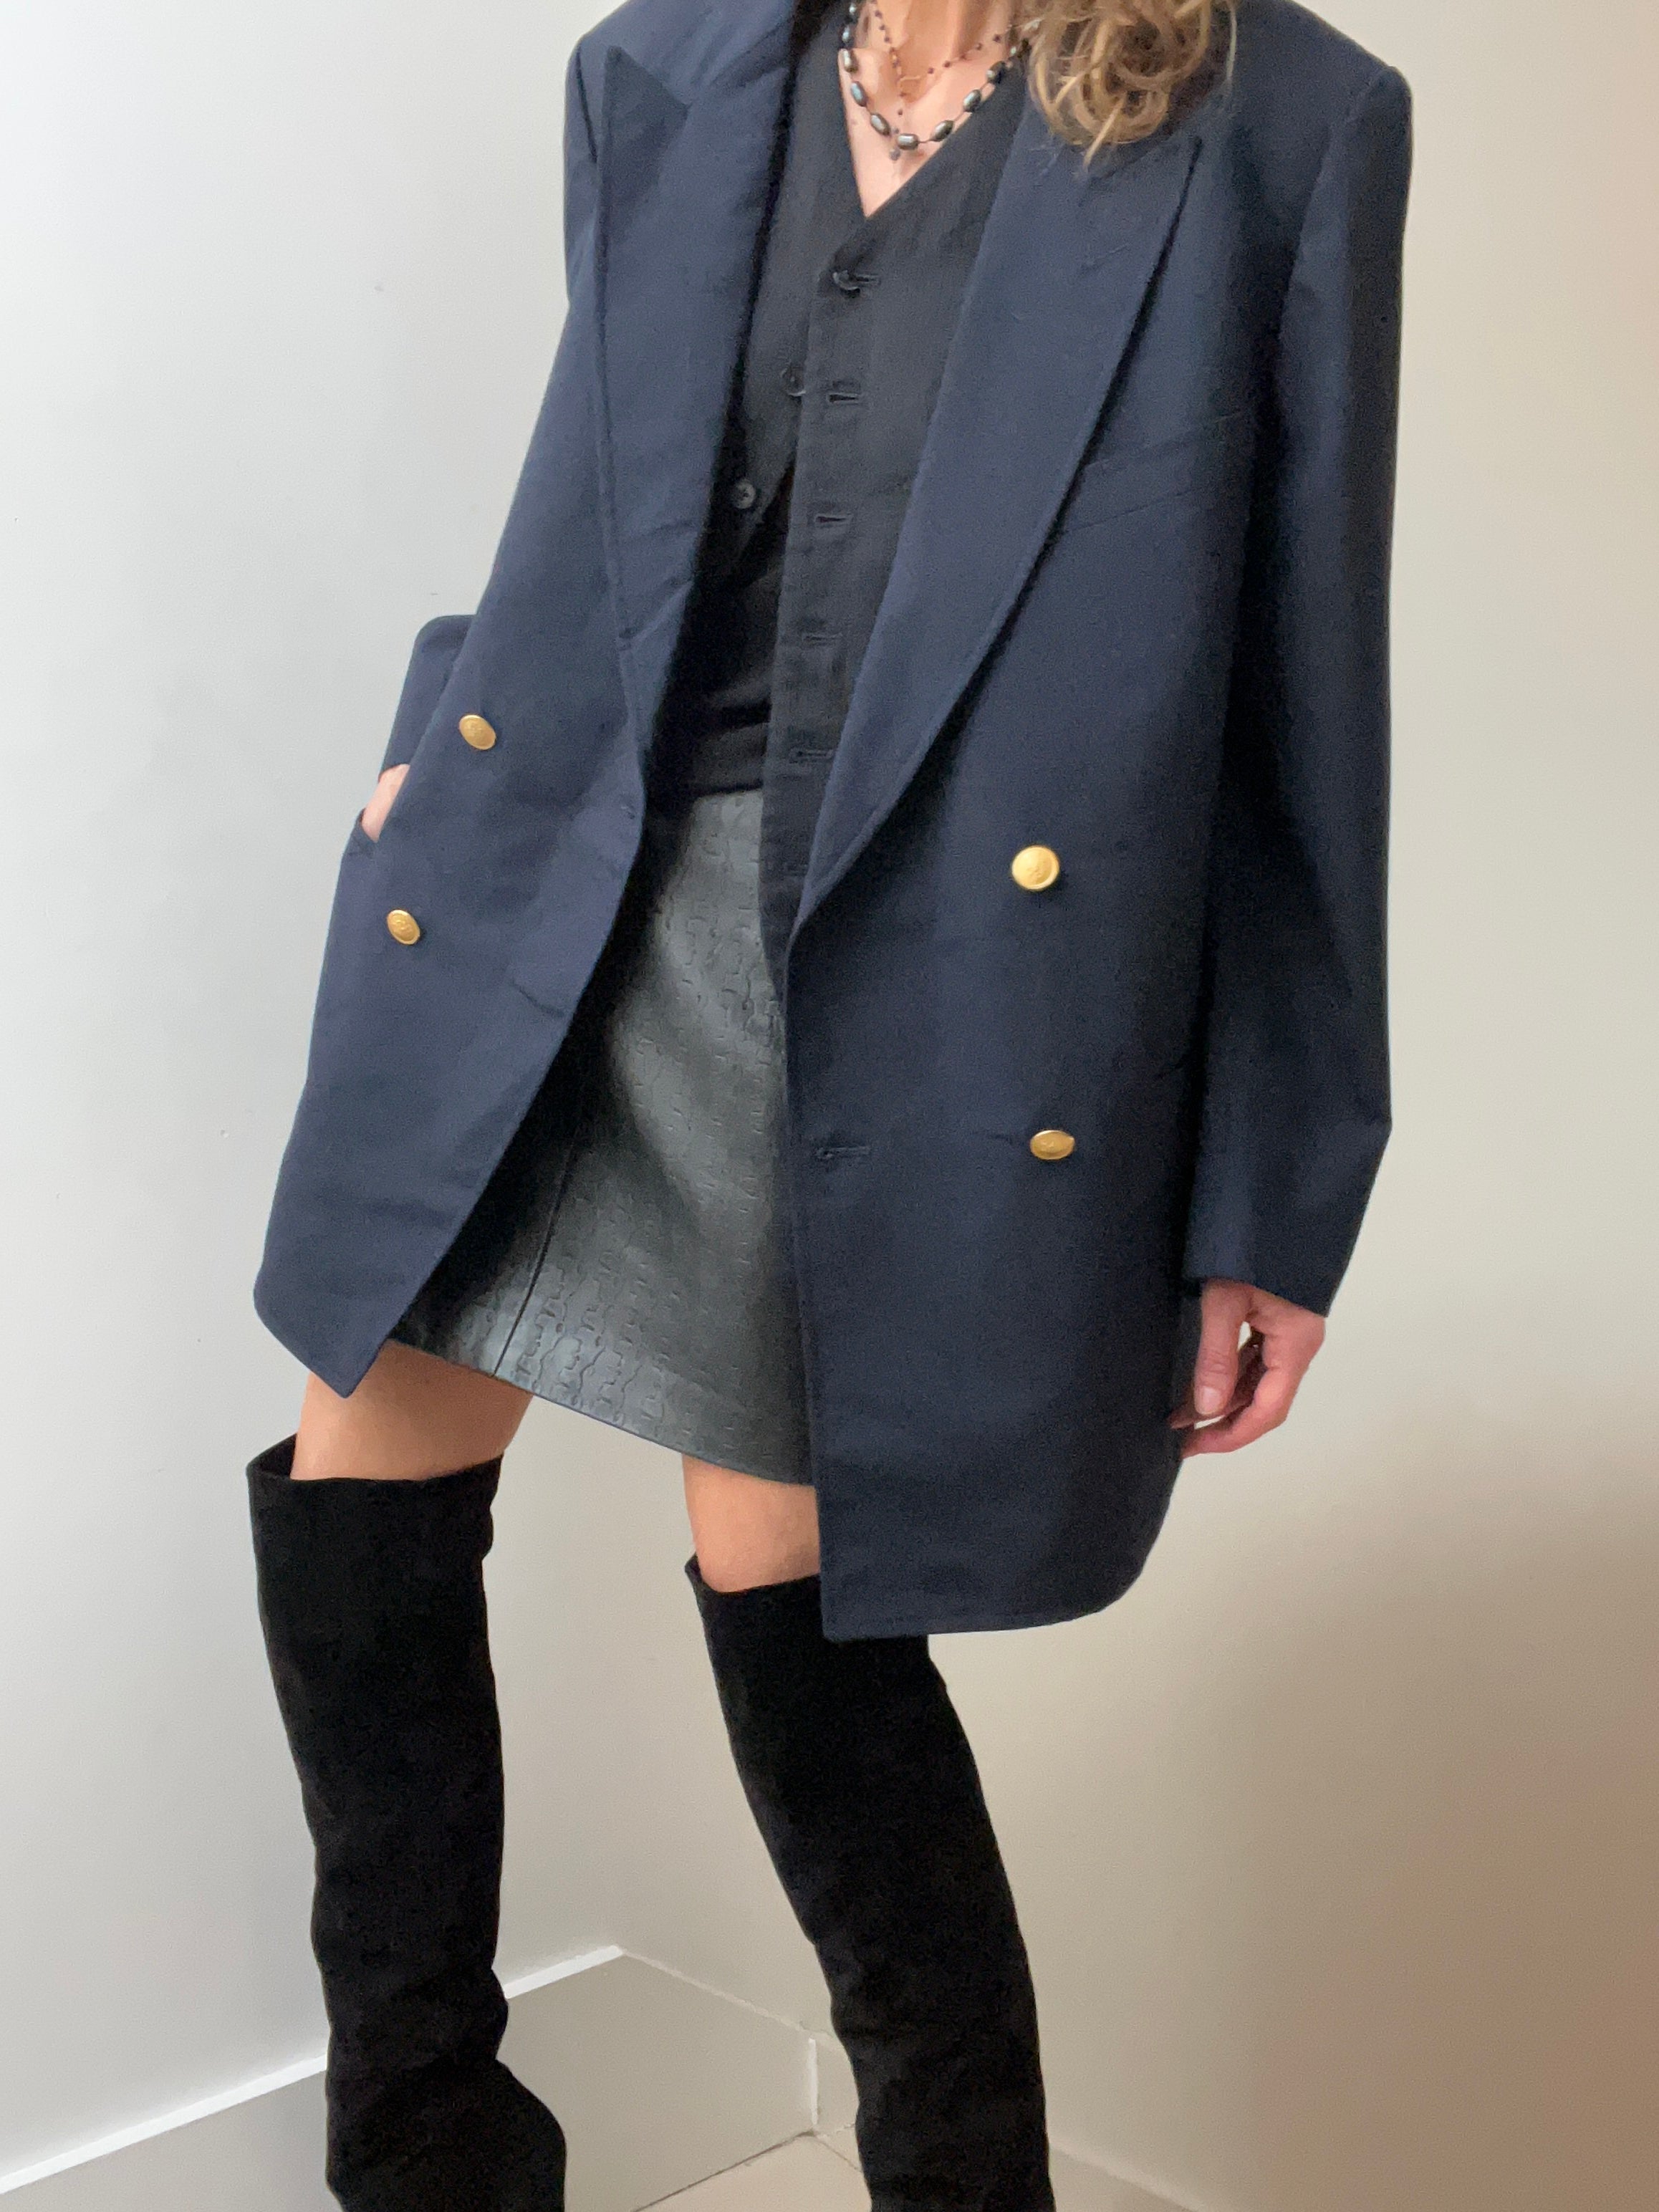 Not specified Jackets Large-XLarge Navy New Yorker Double Breasted Blazer